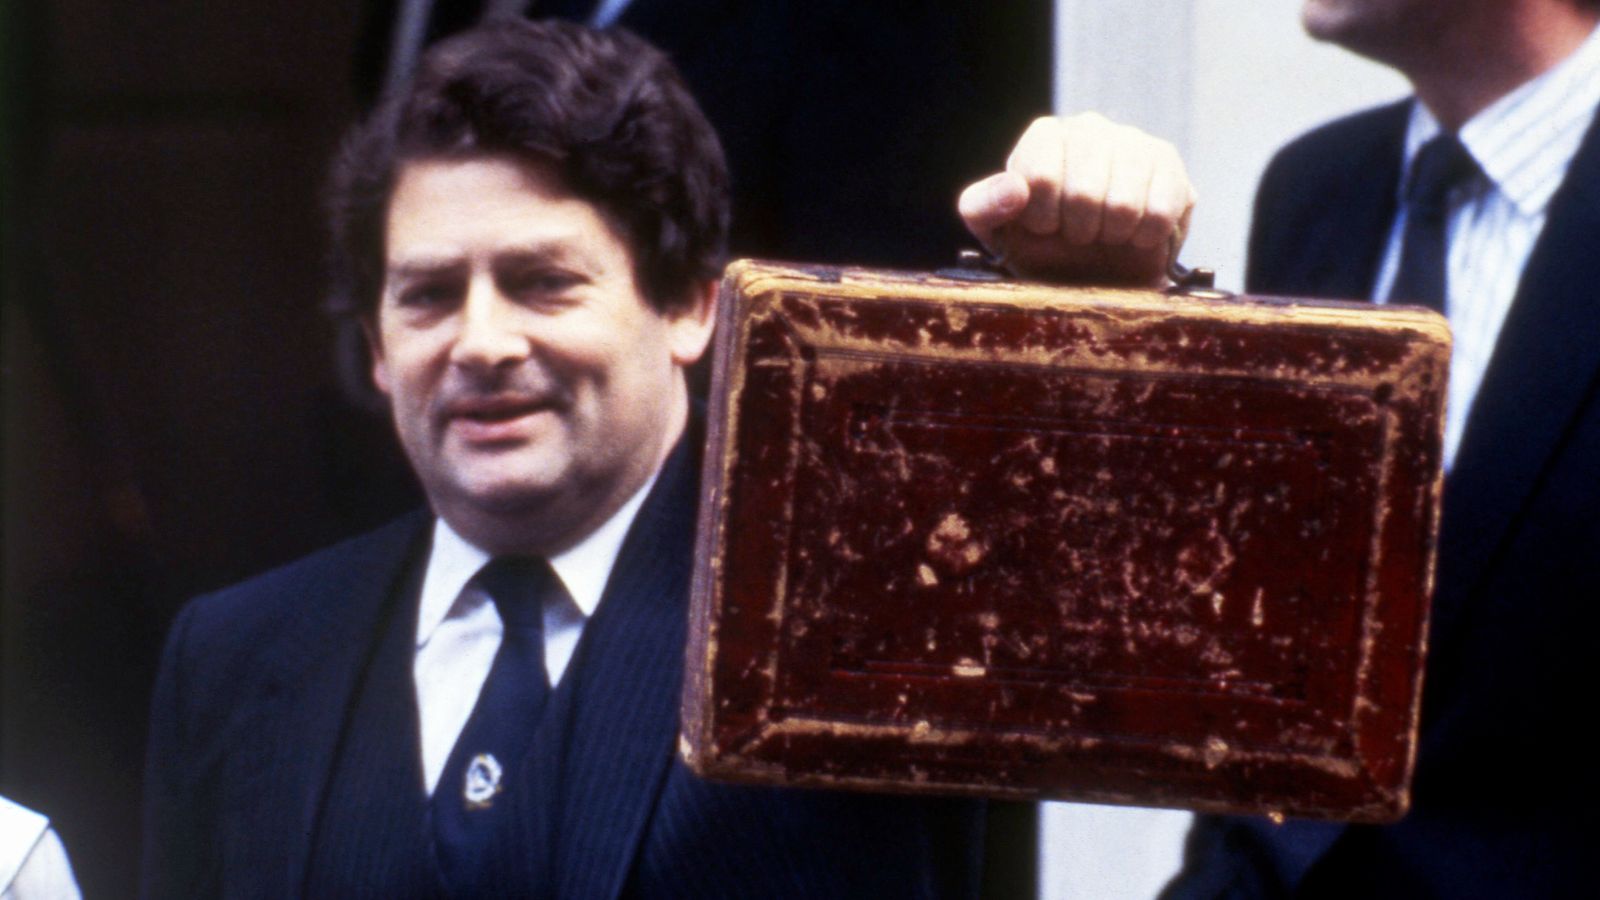 Nigel Lawson dies: The life of Thatcher's chancellor, from political clashes to the Big Boom and climate scepticism